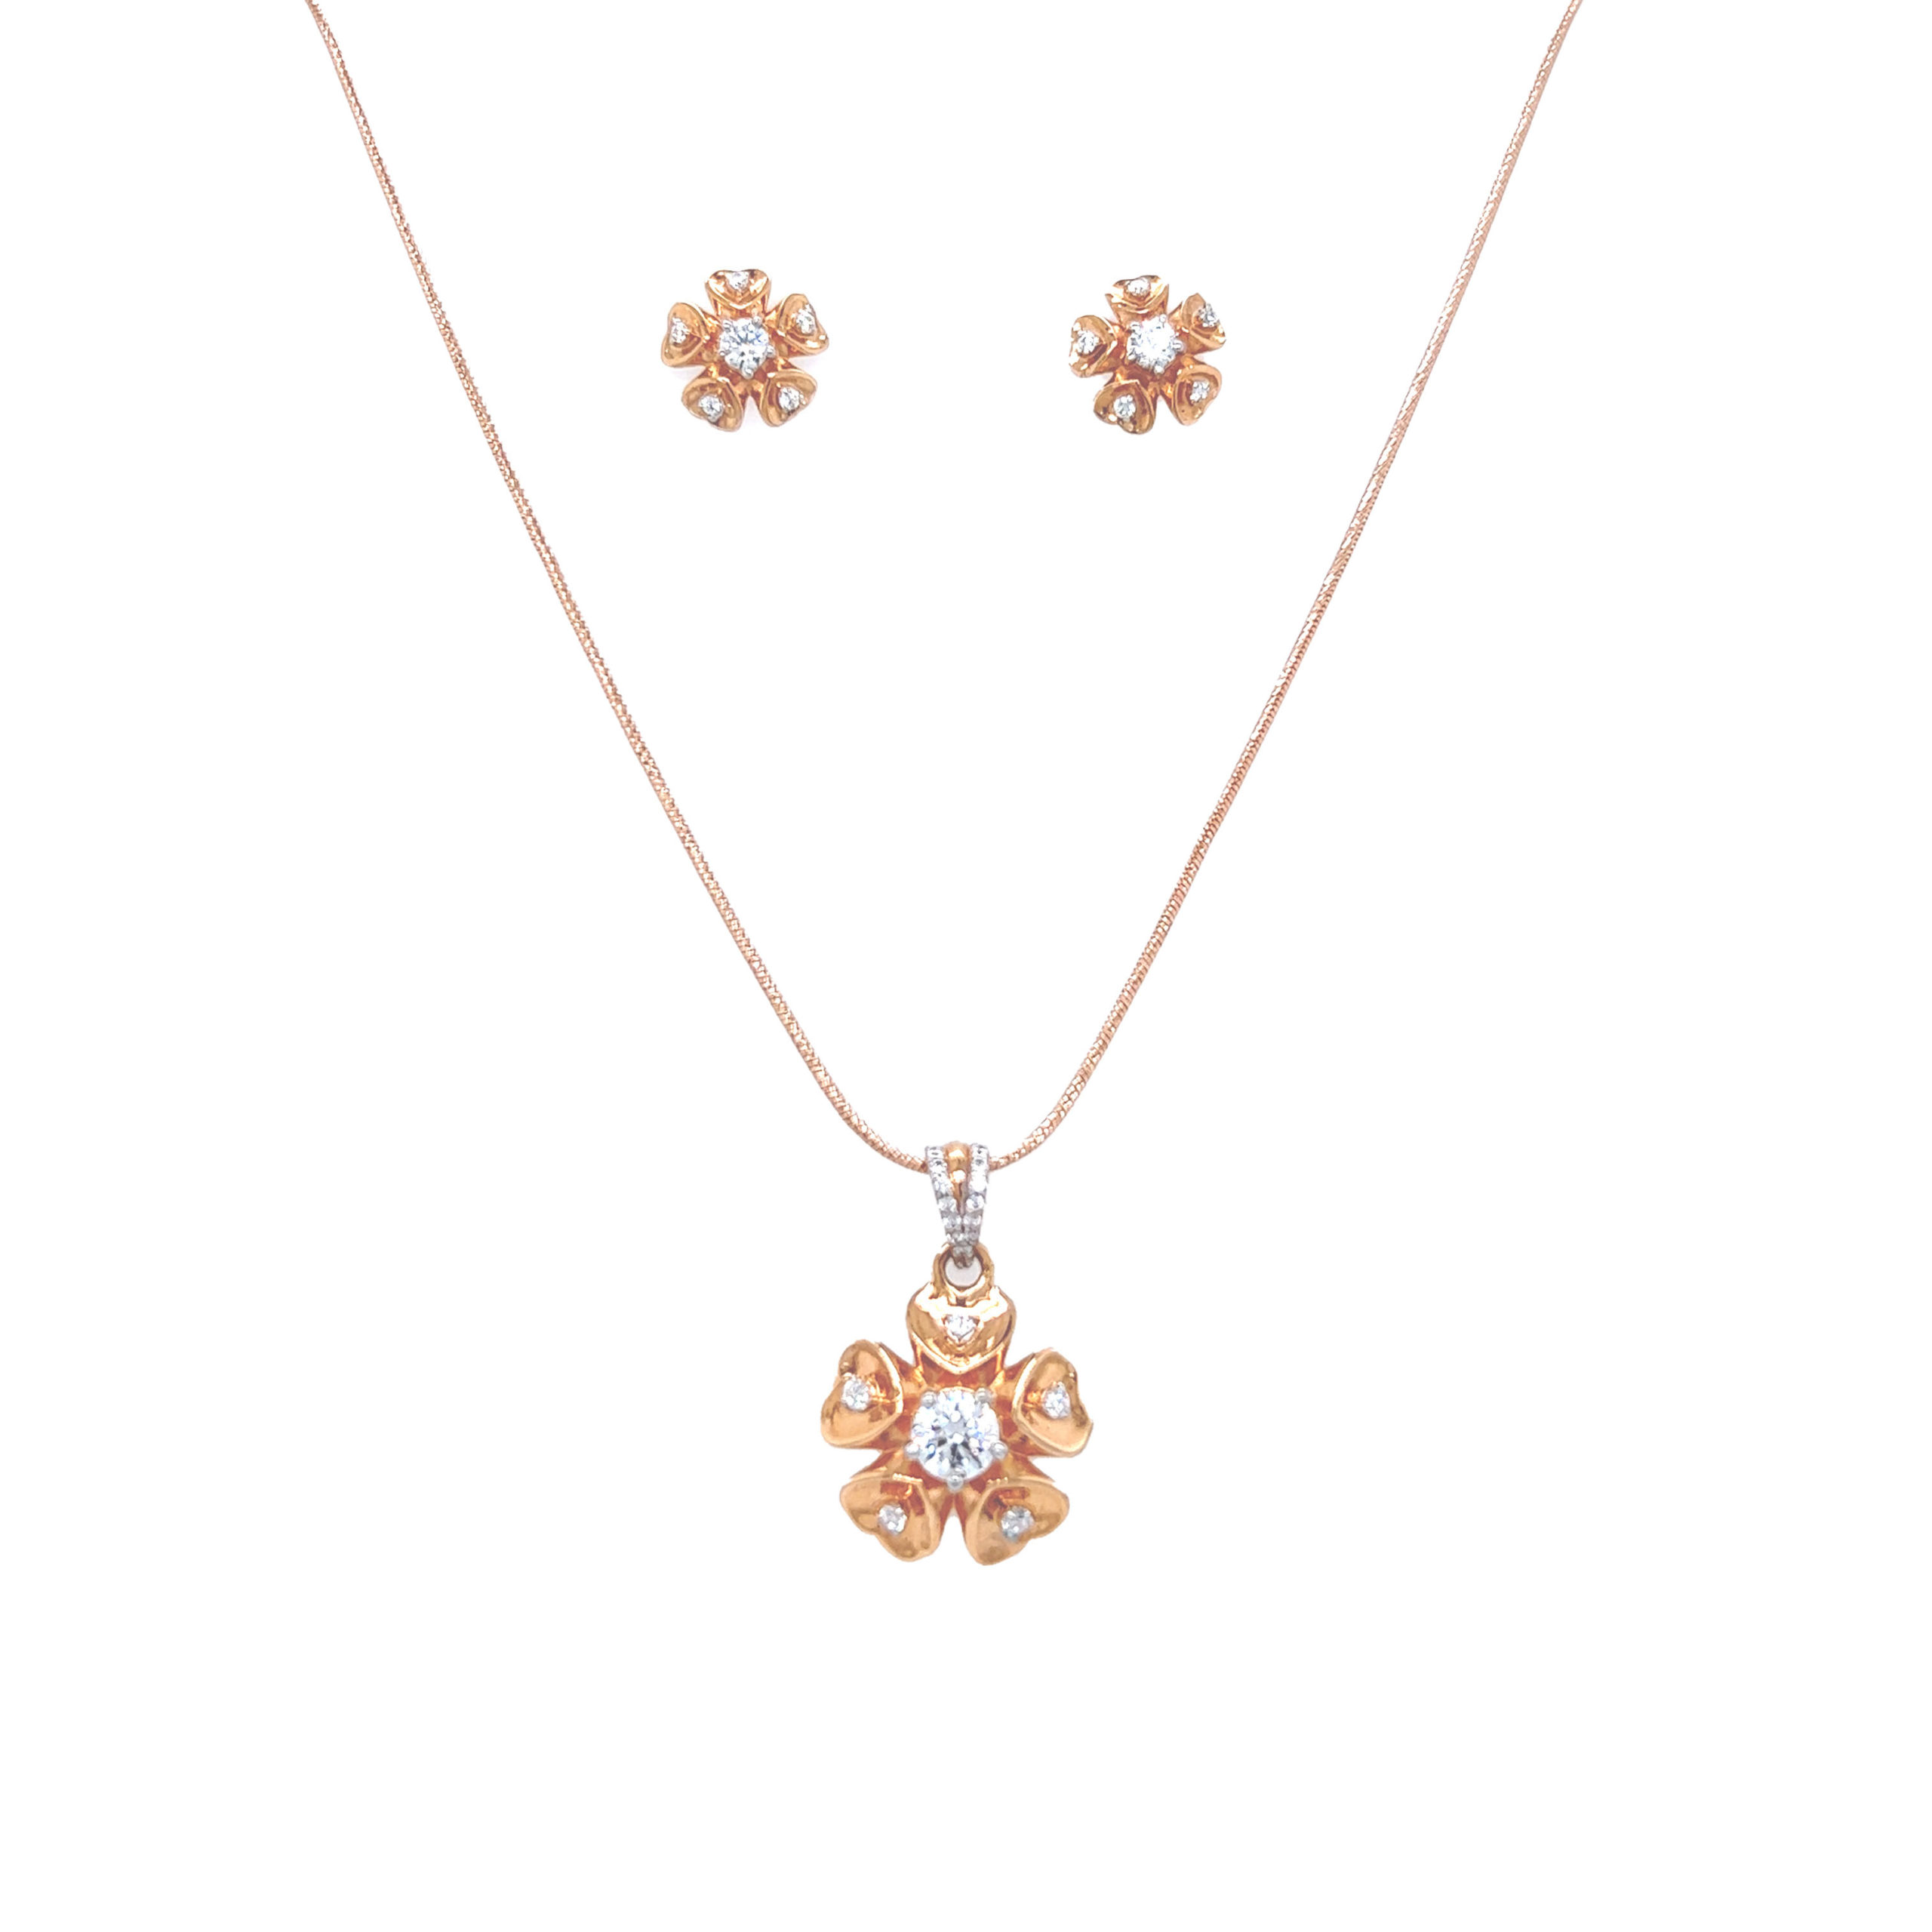 22K Gold Necklace Sets -Indian Gold Jewelry -Buy Online